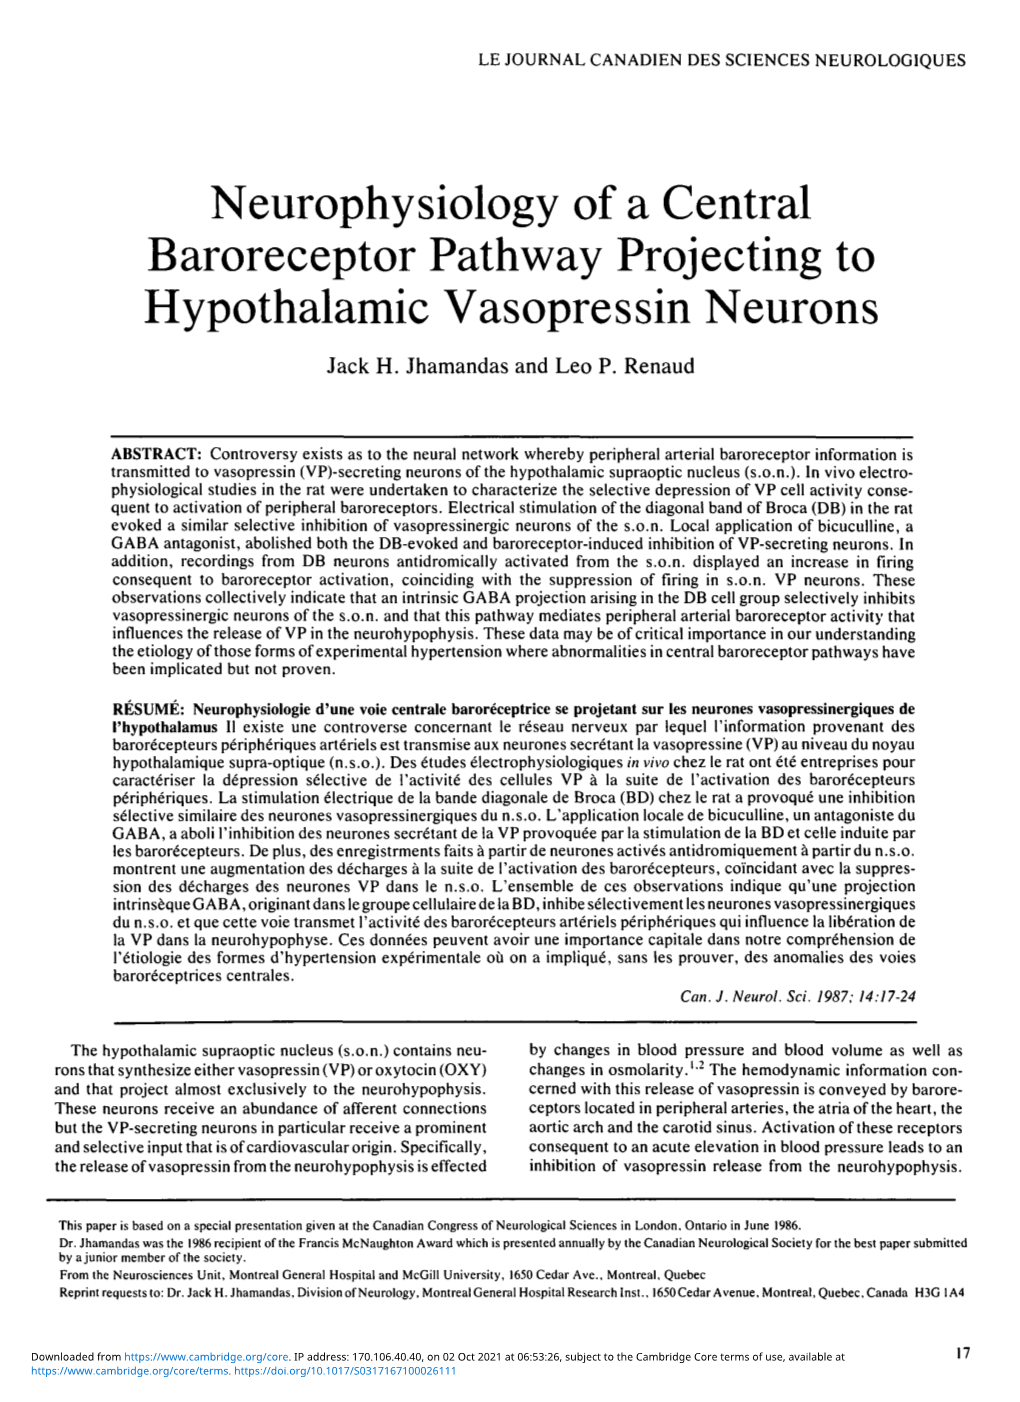 Neurophysiology of a Central Baroreceptor Pathway Projecting to Hypothalamic Vasopressin Neurons Jack H